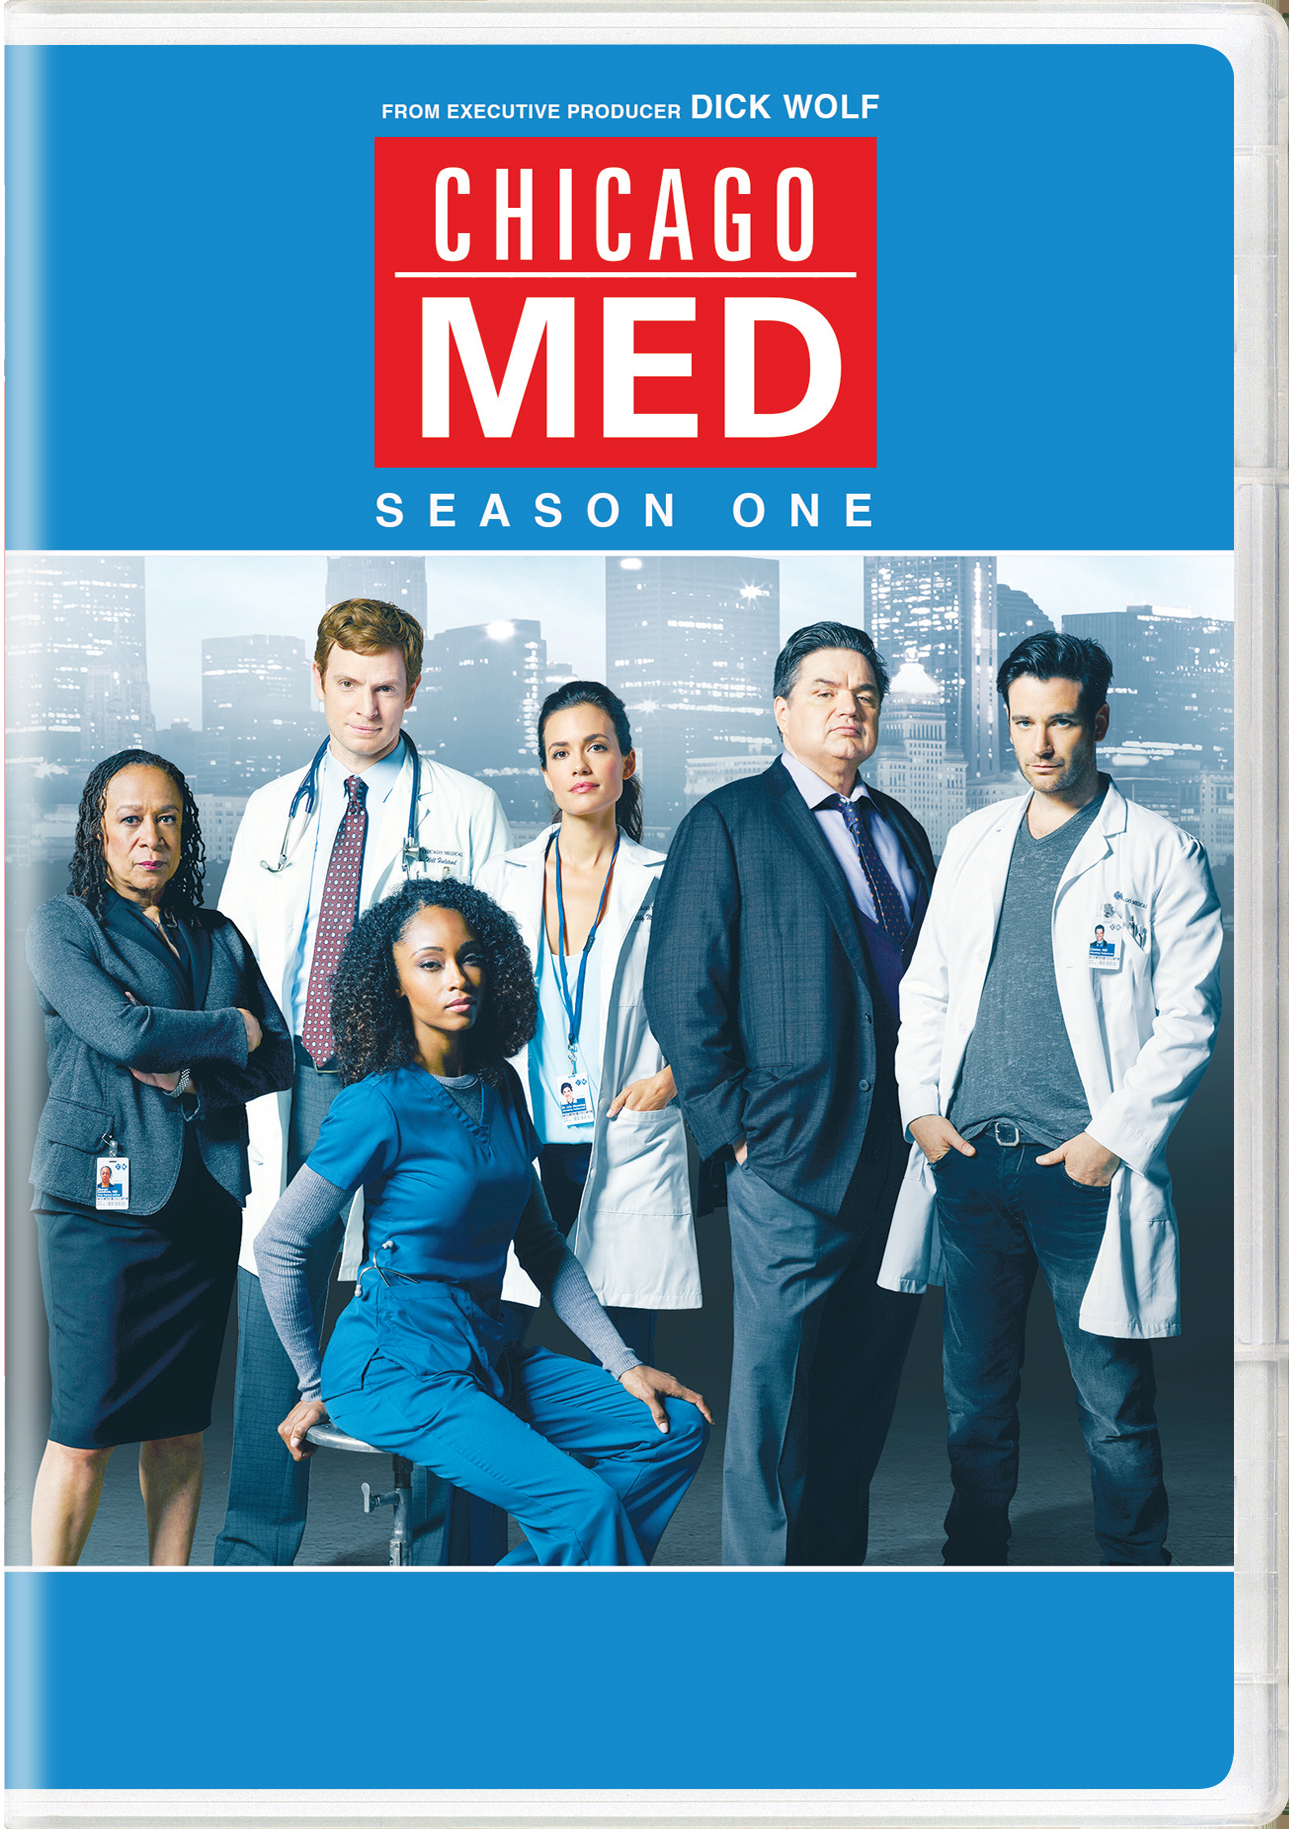 Chicago Med: Season One - DVD   - Drama Television On DVD - TV Shows On GRUV